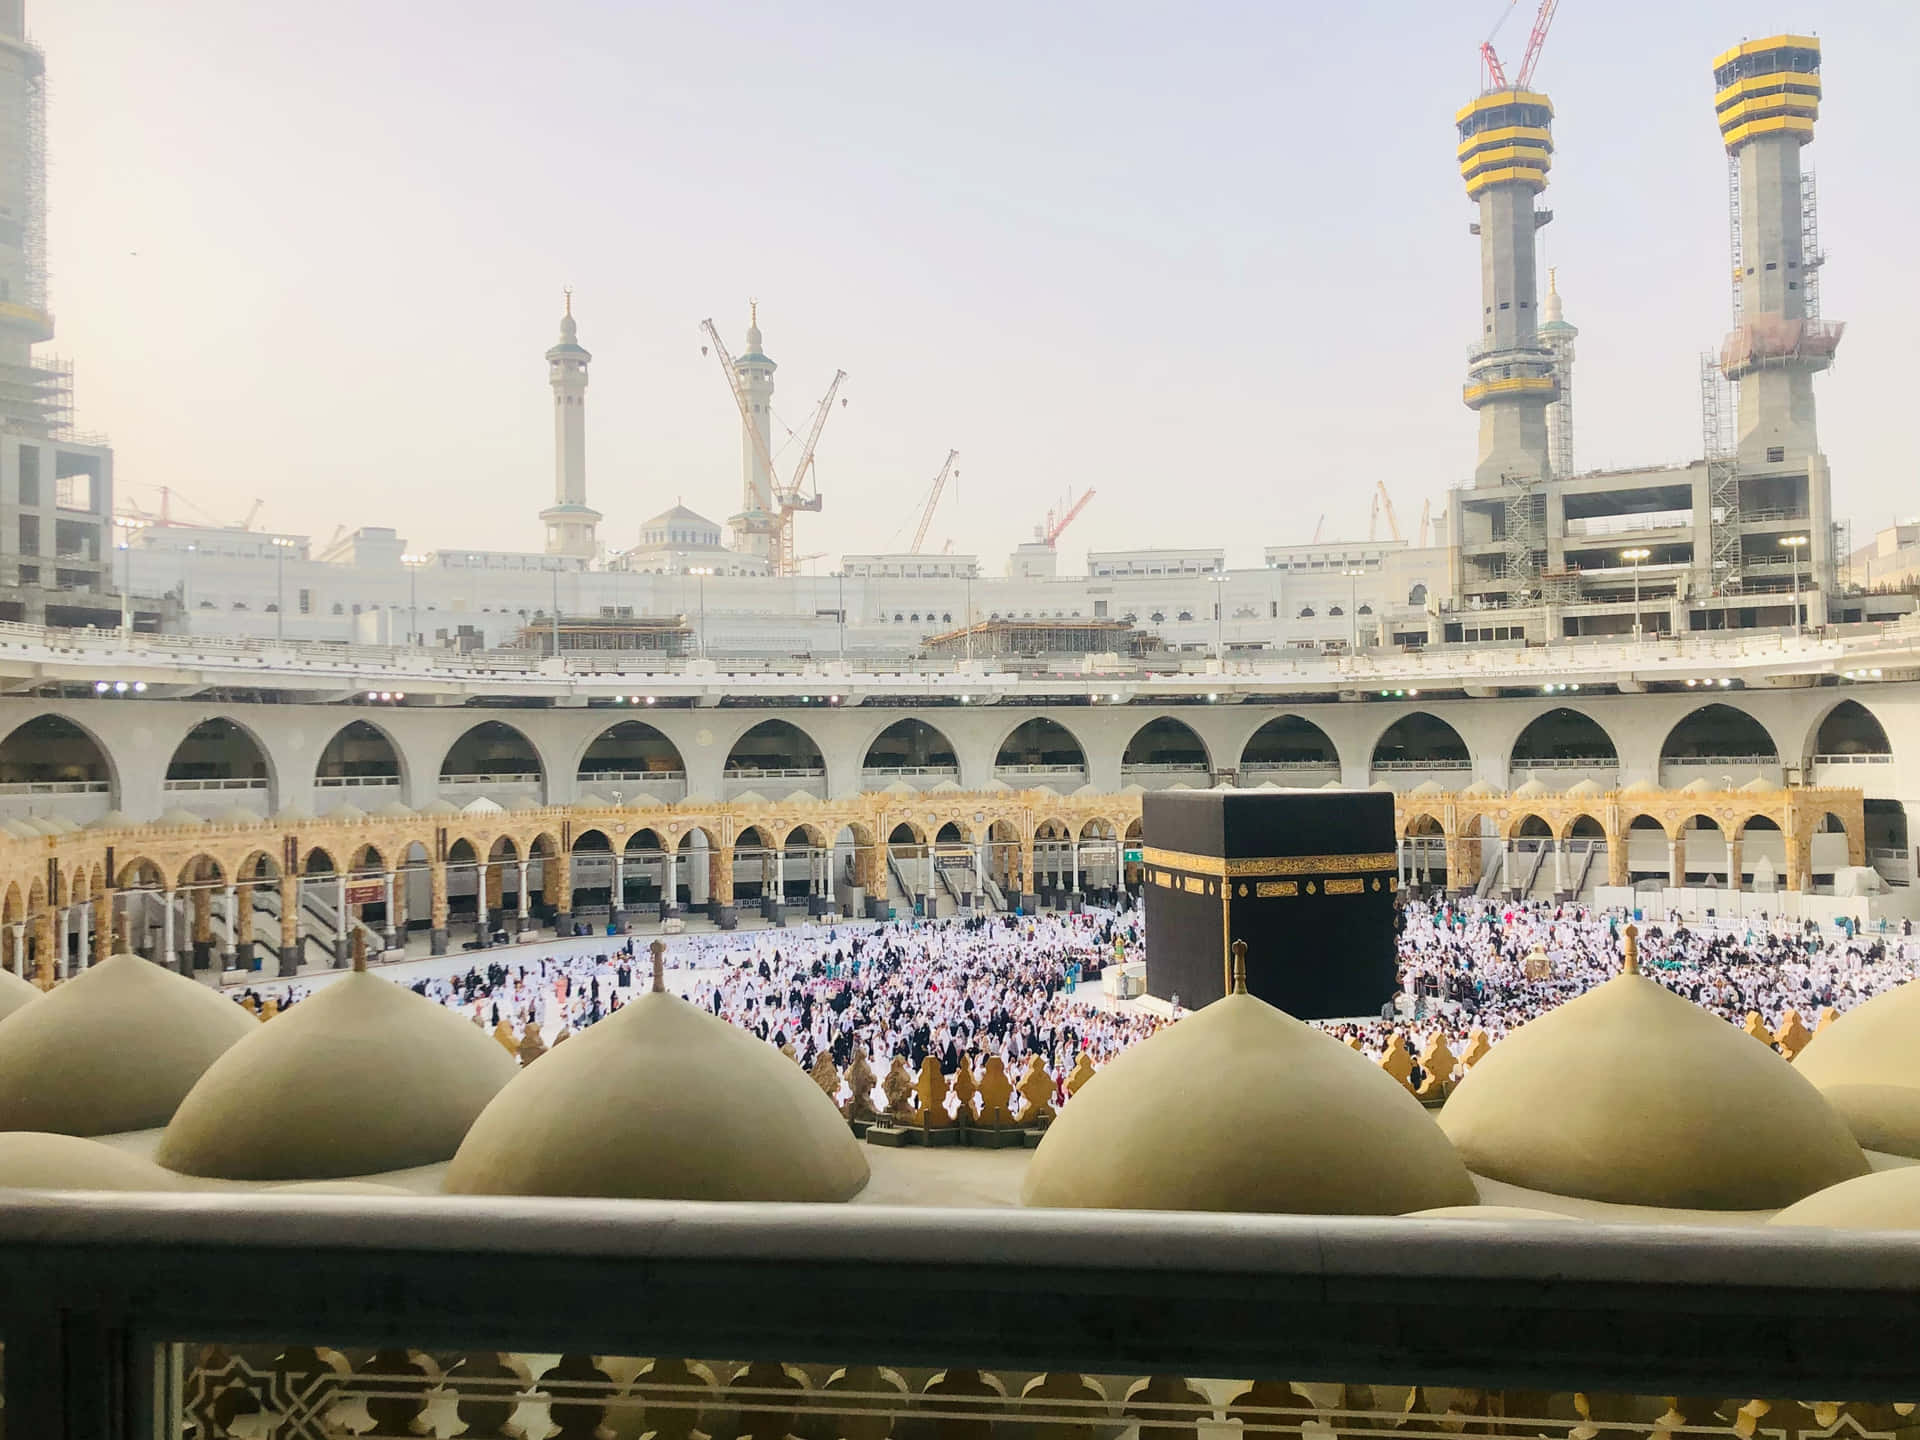 The stunning view of Mecca Mosque, home to the Islamic religion.